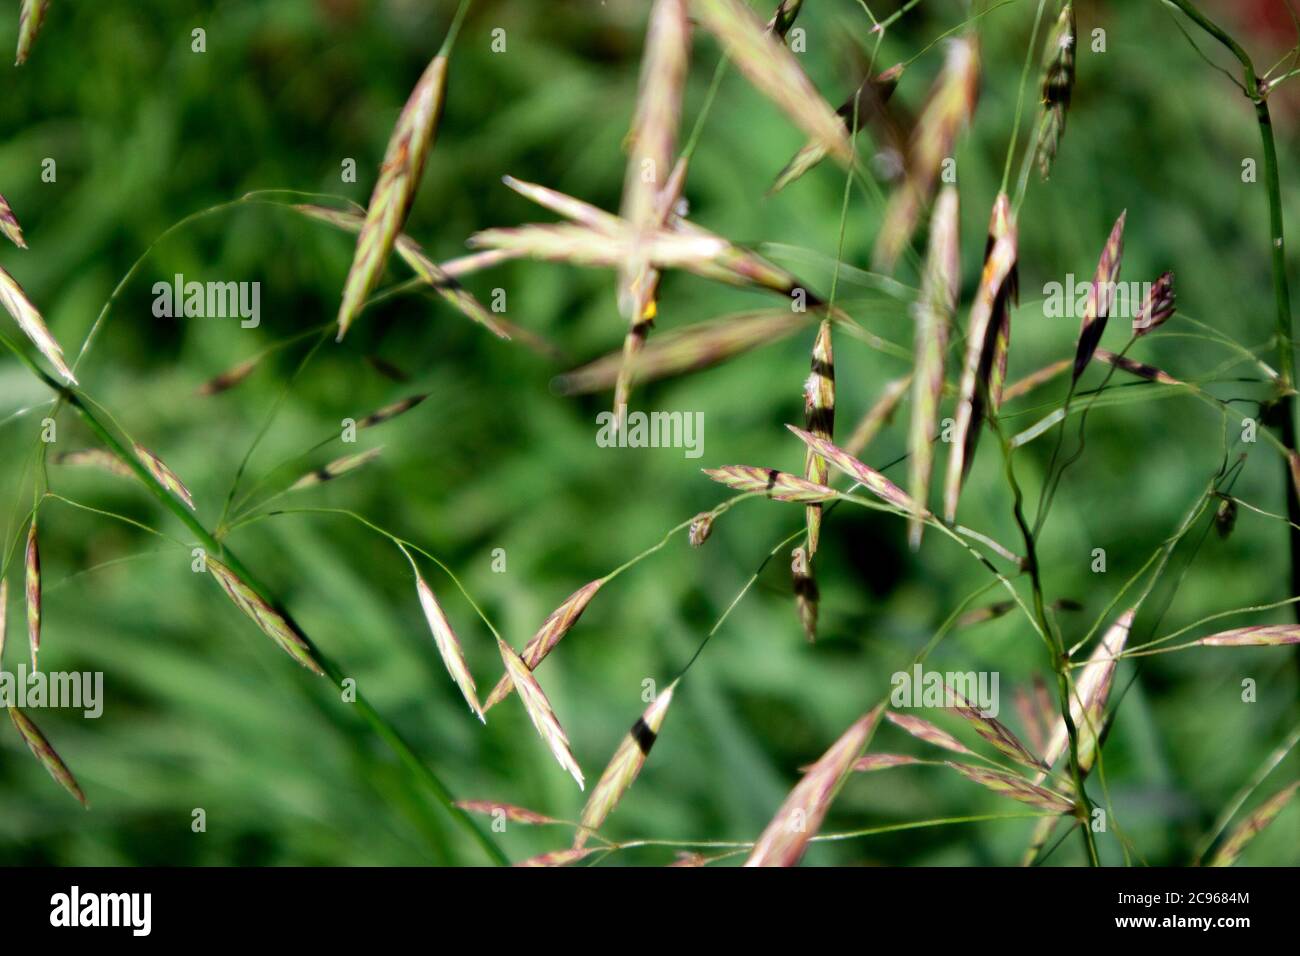 Spikes of perennial wild meadow grass bromus inermis of different focusing against green foliage Stock Photo